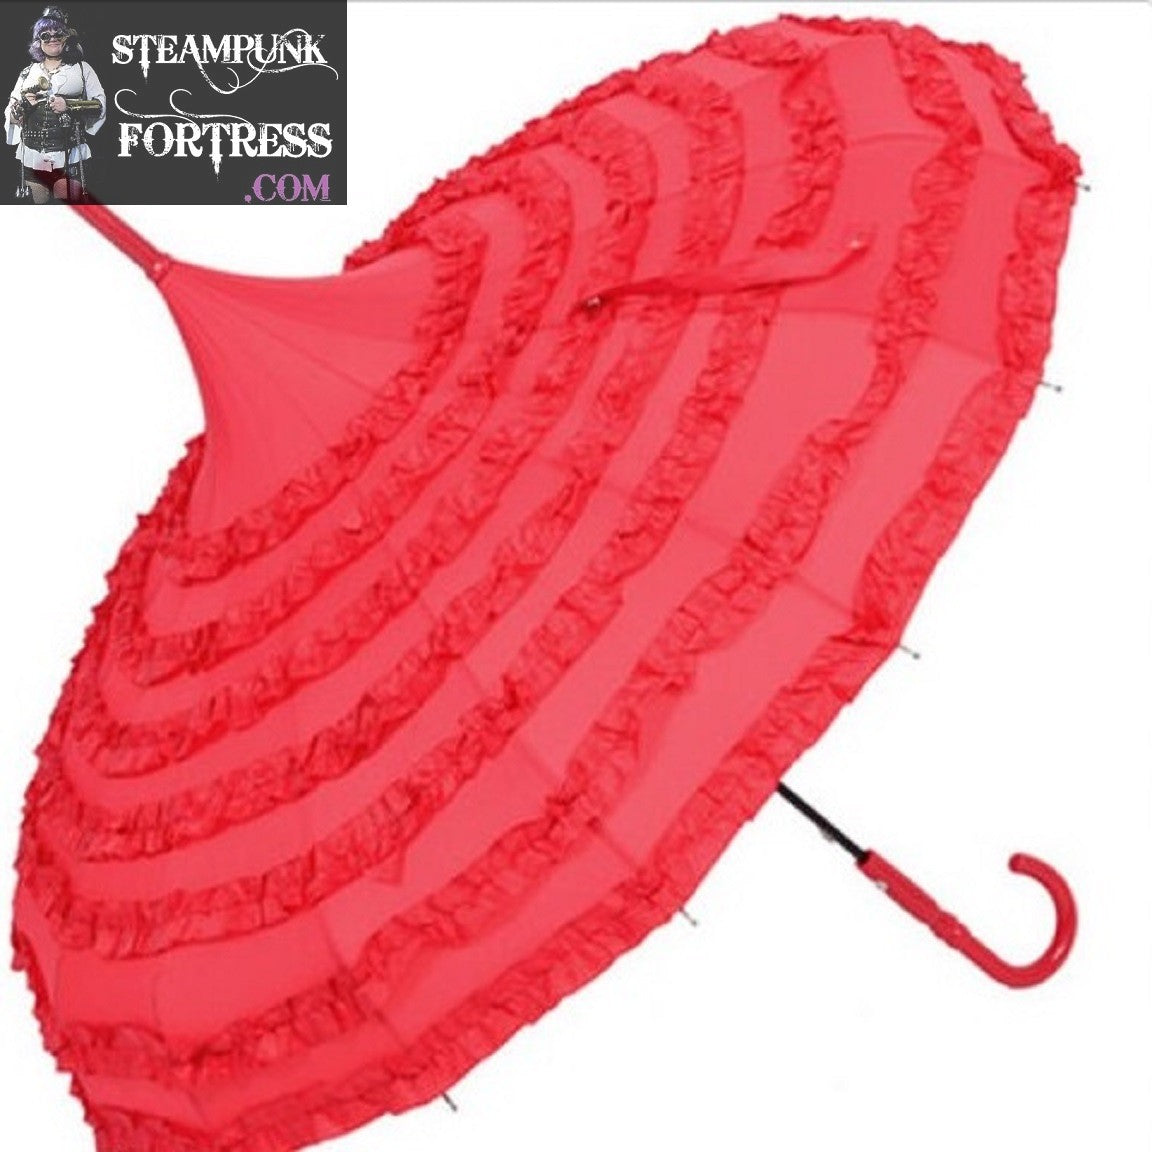 RED BASE ROWS OF RED RUFFLES STEAMPUNK UMBRELLA PARASOL PAGODA VICTORIAN EDWARDIAN GOTHIC WEDDING COSPLAY COSTUME- MASS PRODUCED